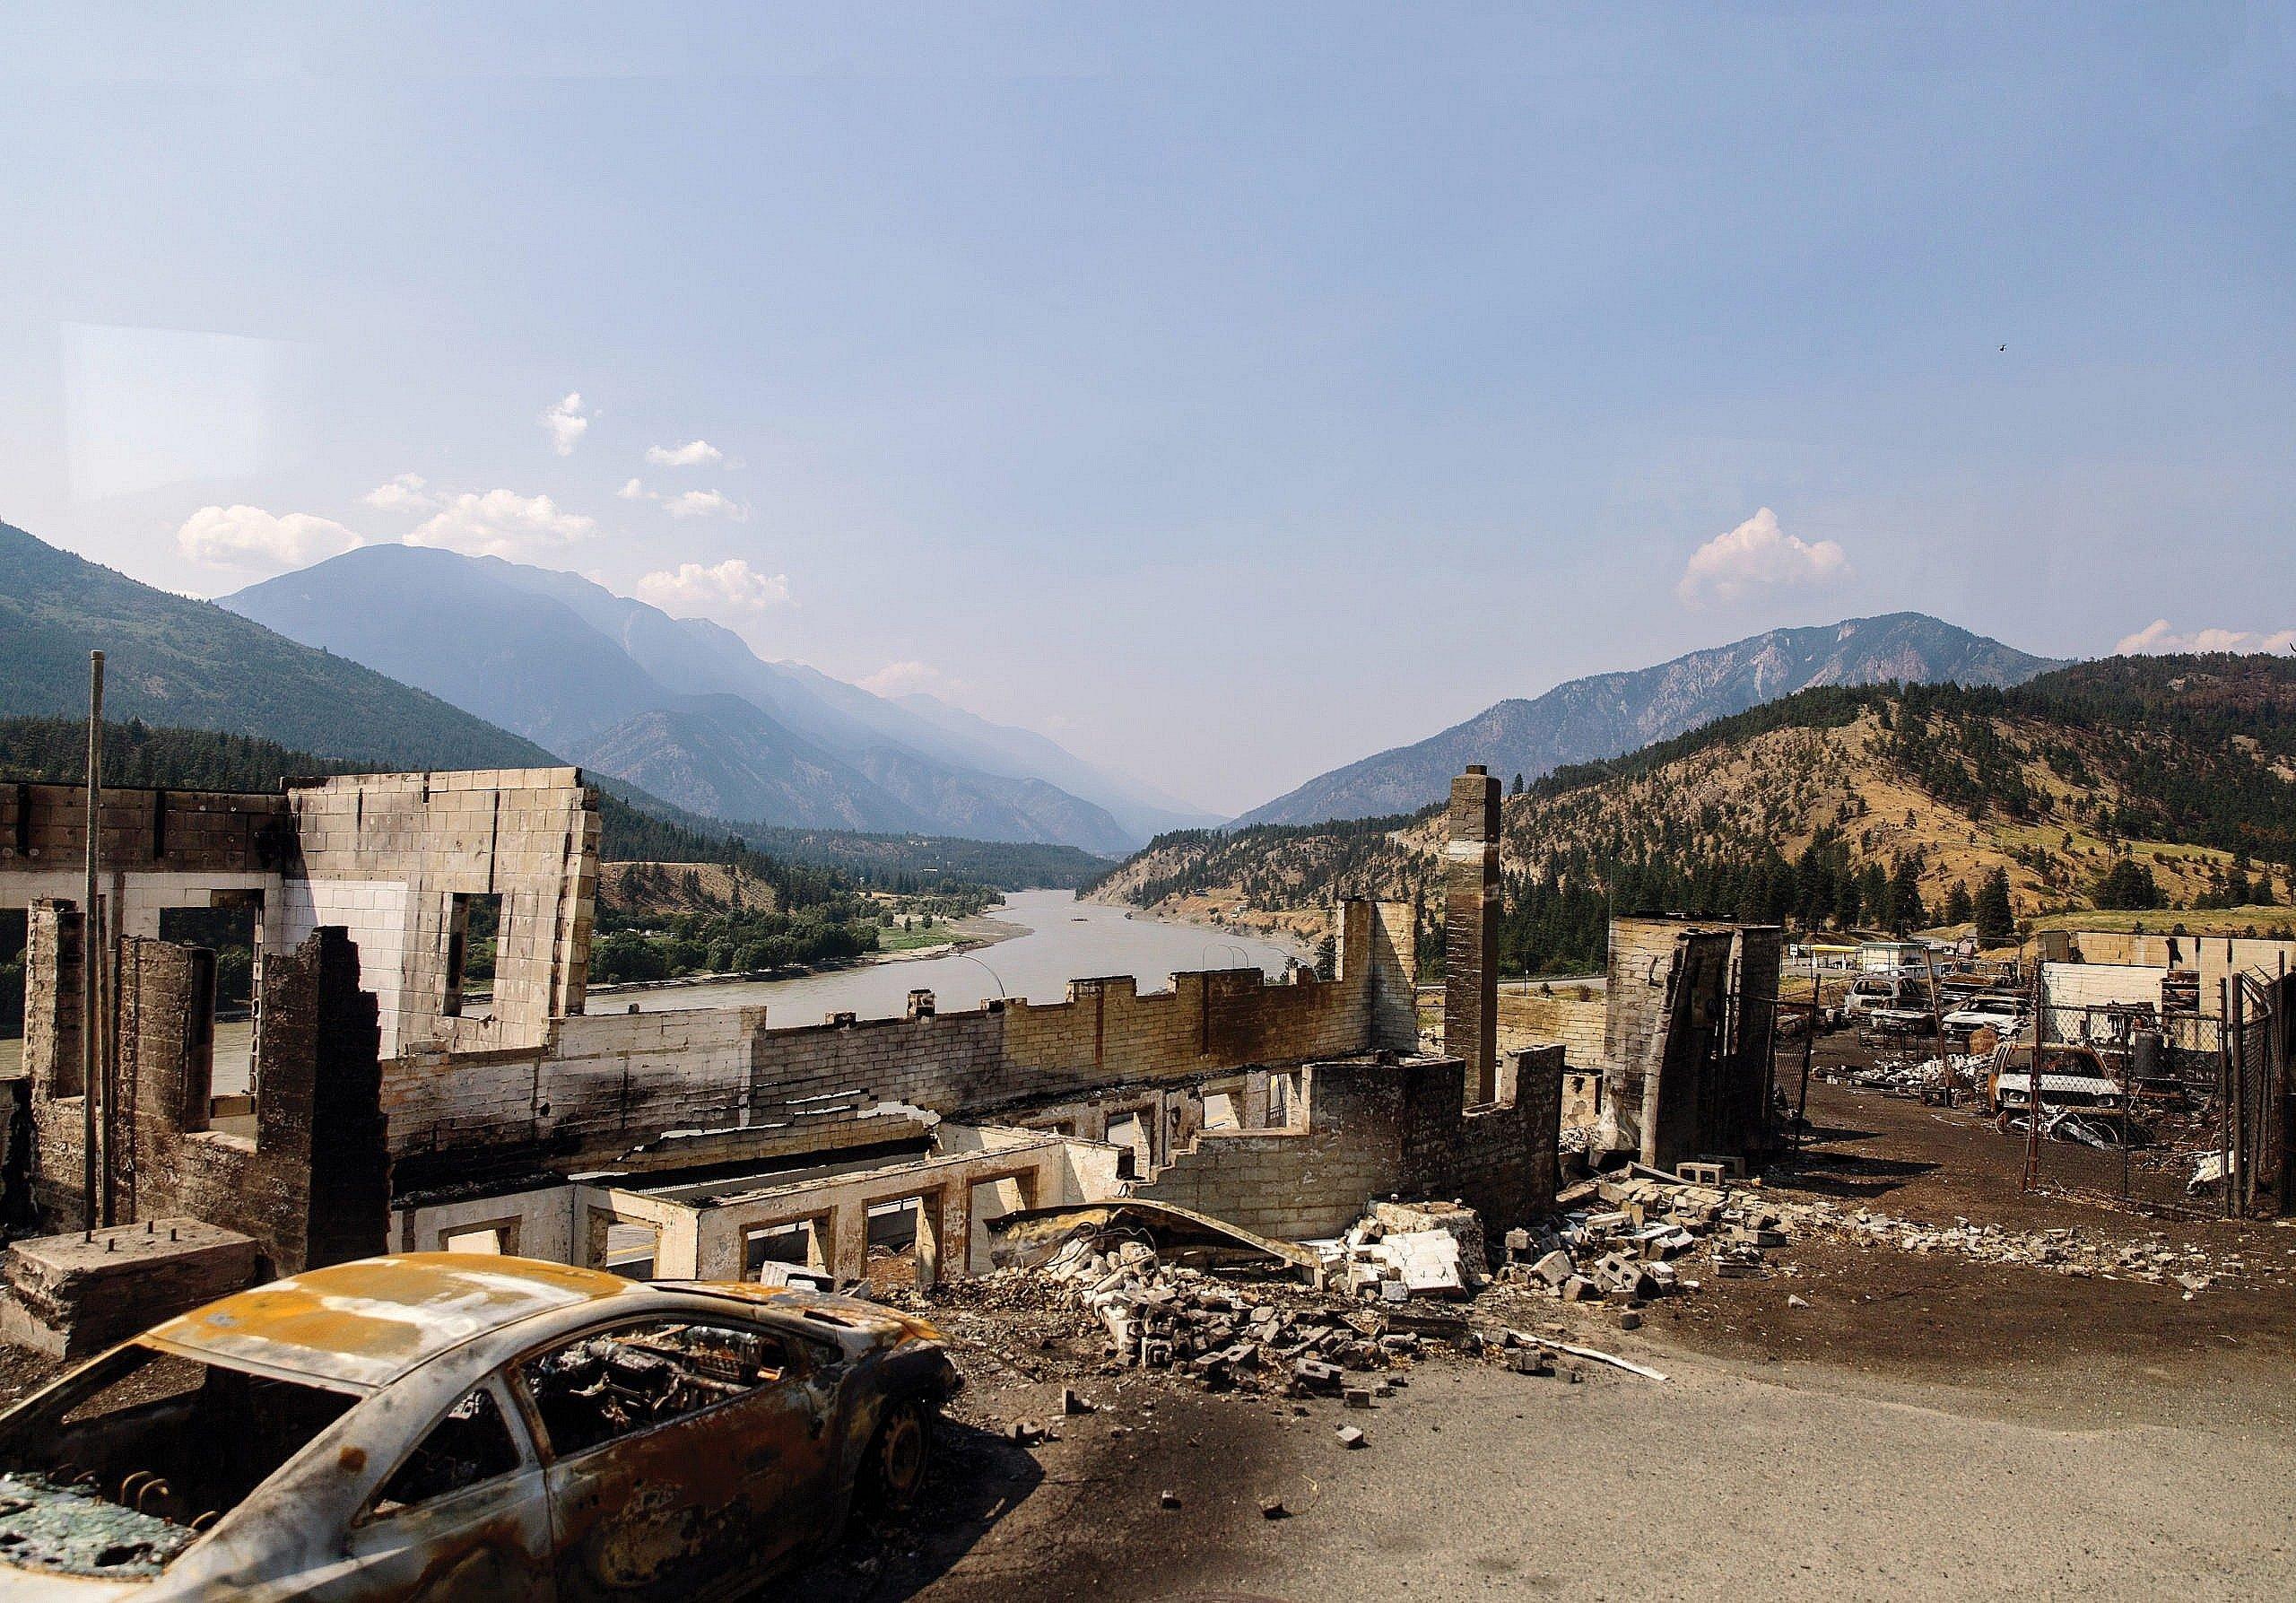 British Columbia:Â A wildfire destroyed Lytton, B.C., in July of 2021. It followed a record-breaking heat dome, which killed more than 600 people in B.C.âthe deadliest weather event in Canadian history. In 2060,Â more heat domes will spawn more wildfires, which will burn hotter, larger and longer, leading to a decline in prosperity, social cohesion and physical health.